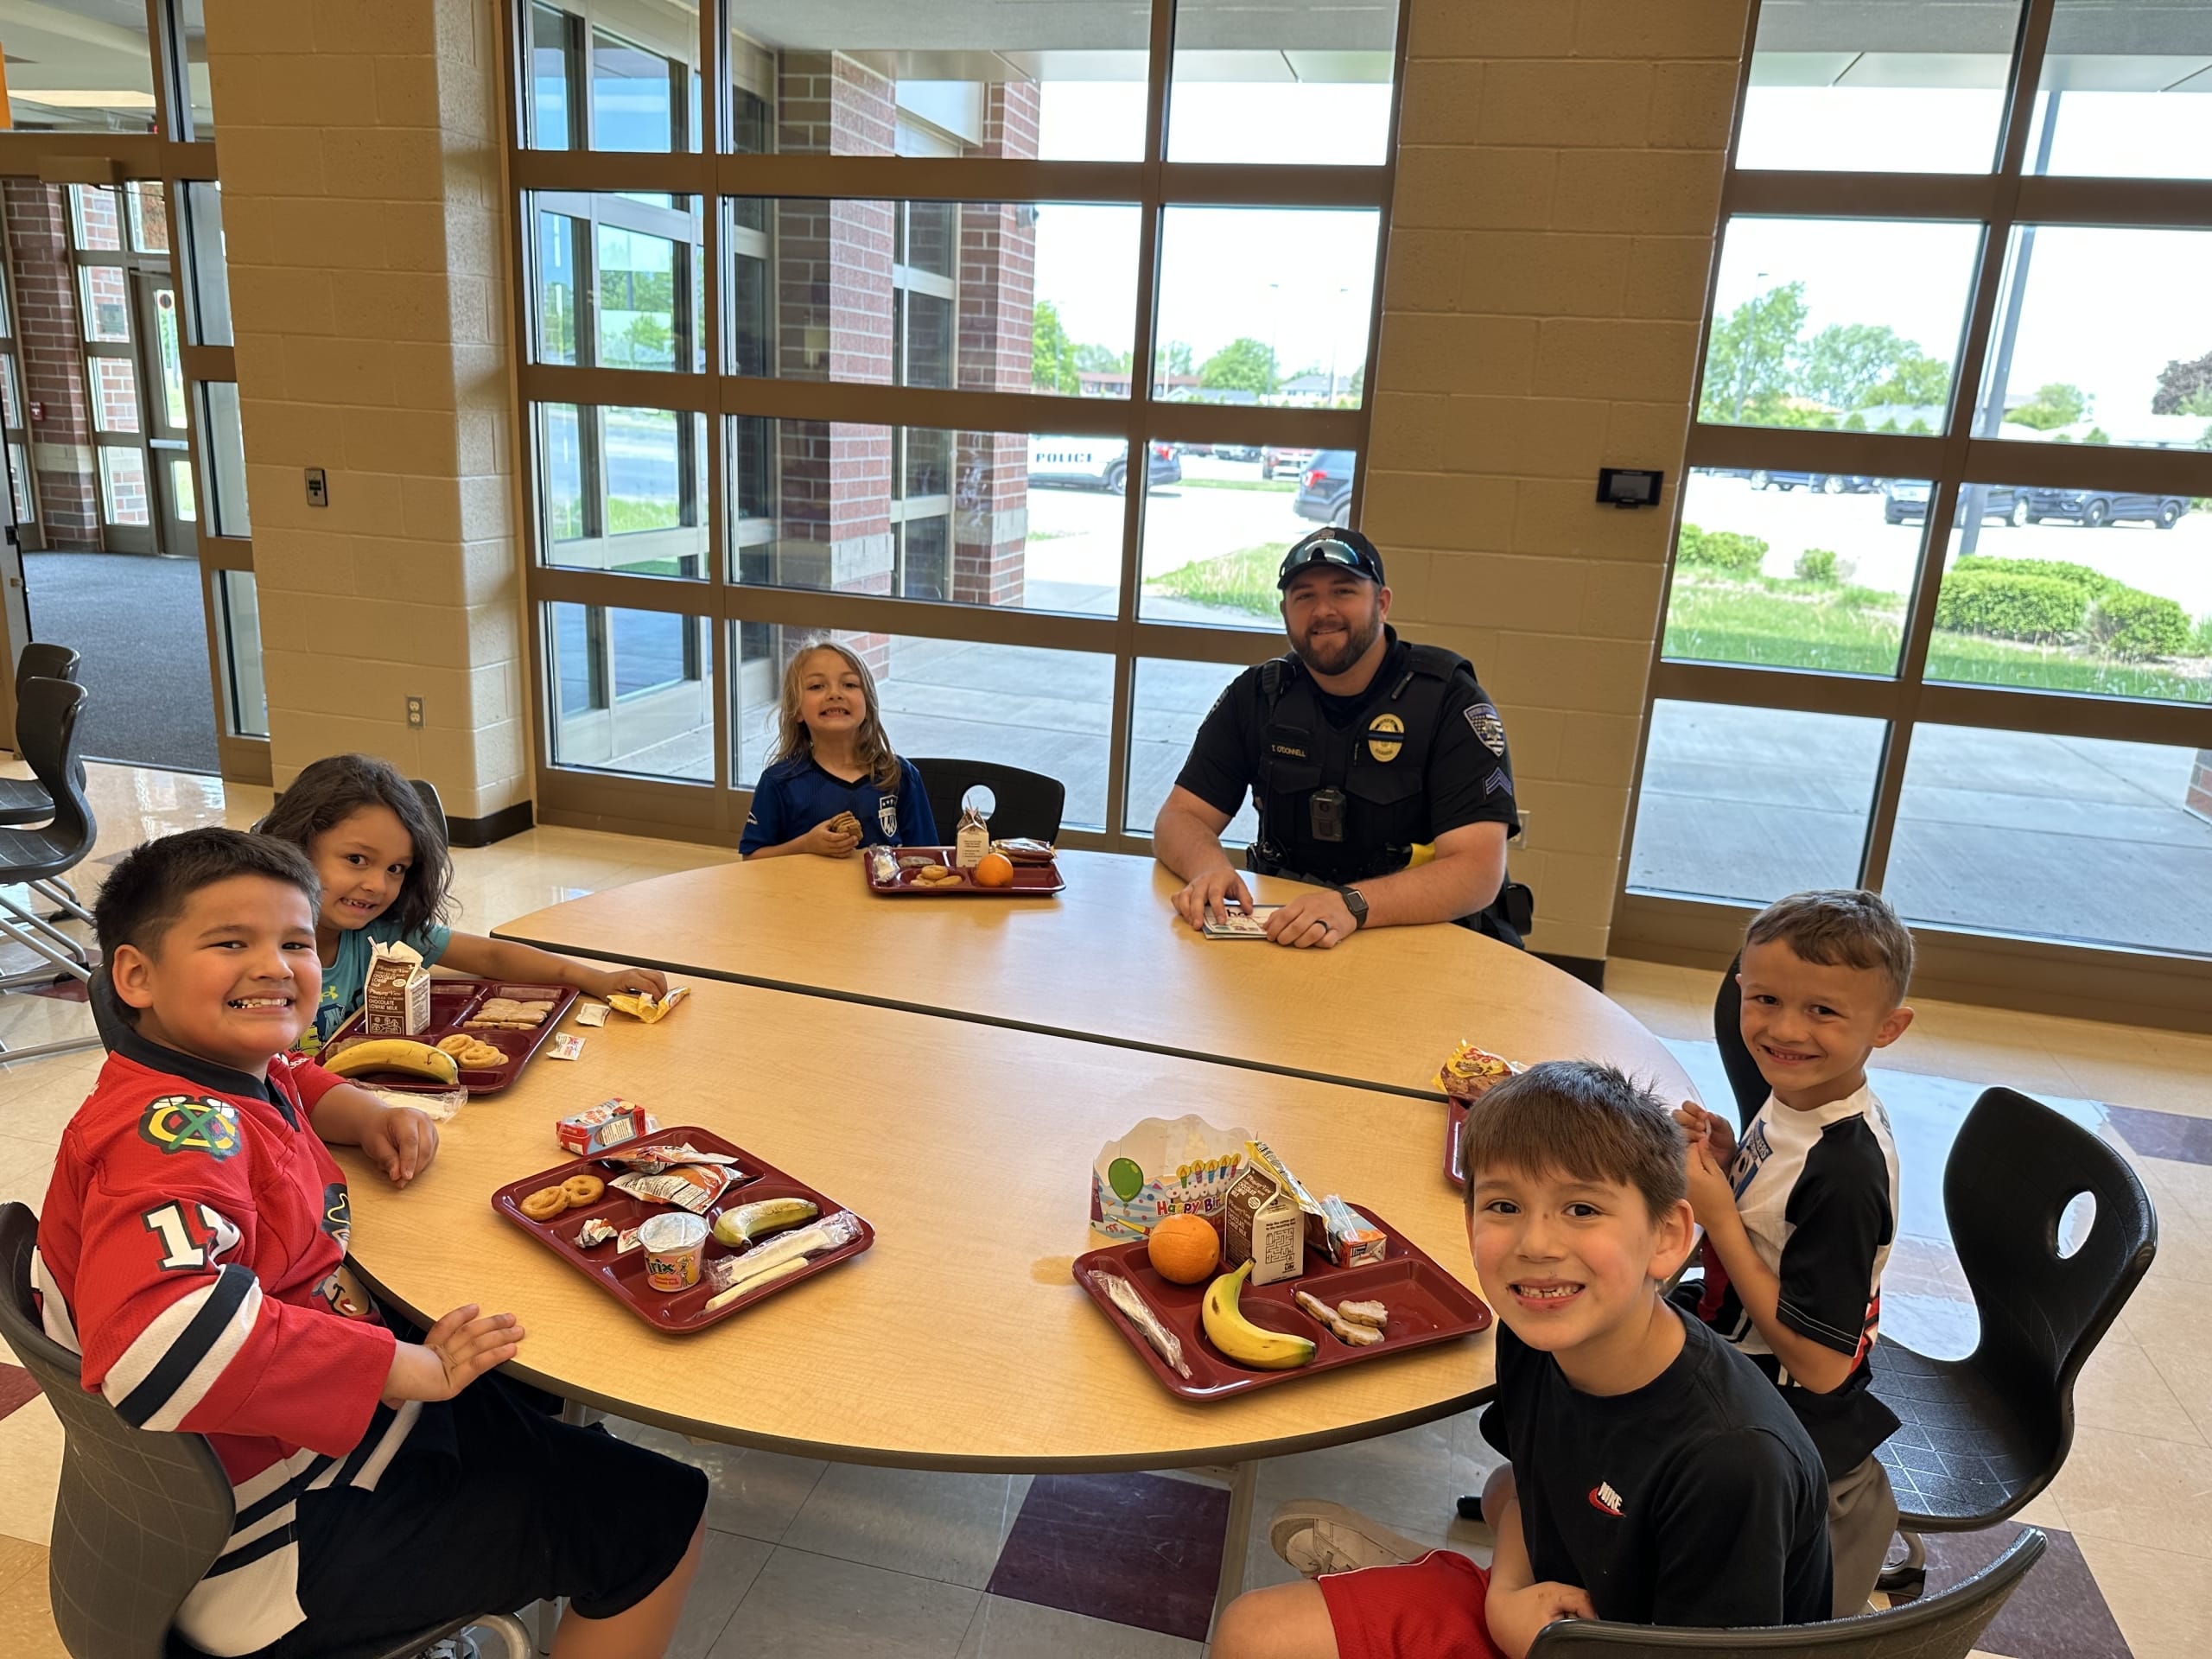 The Dyer Police Officers came to eat lunch with our students. Everyone had a great time!